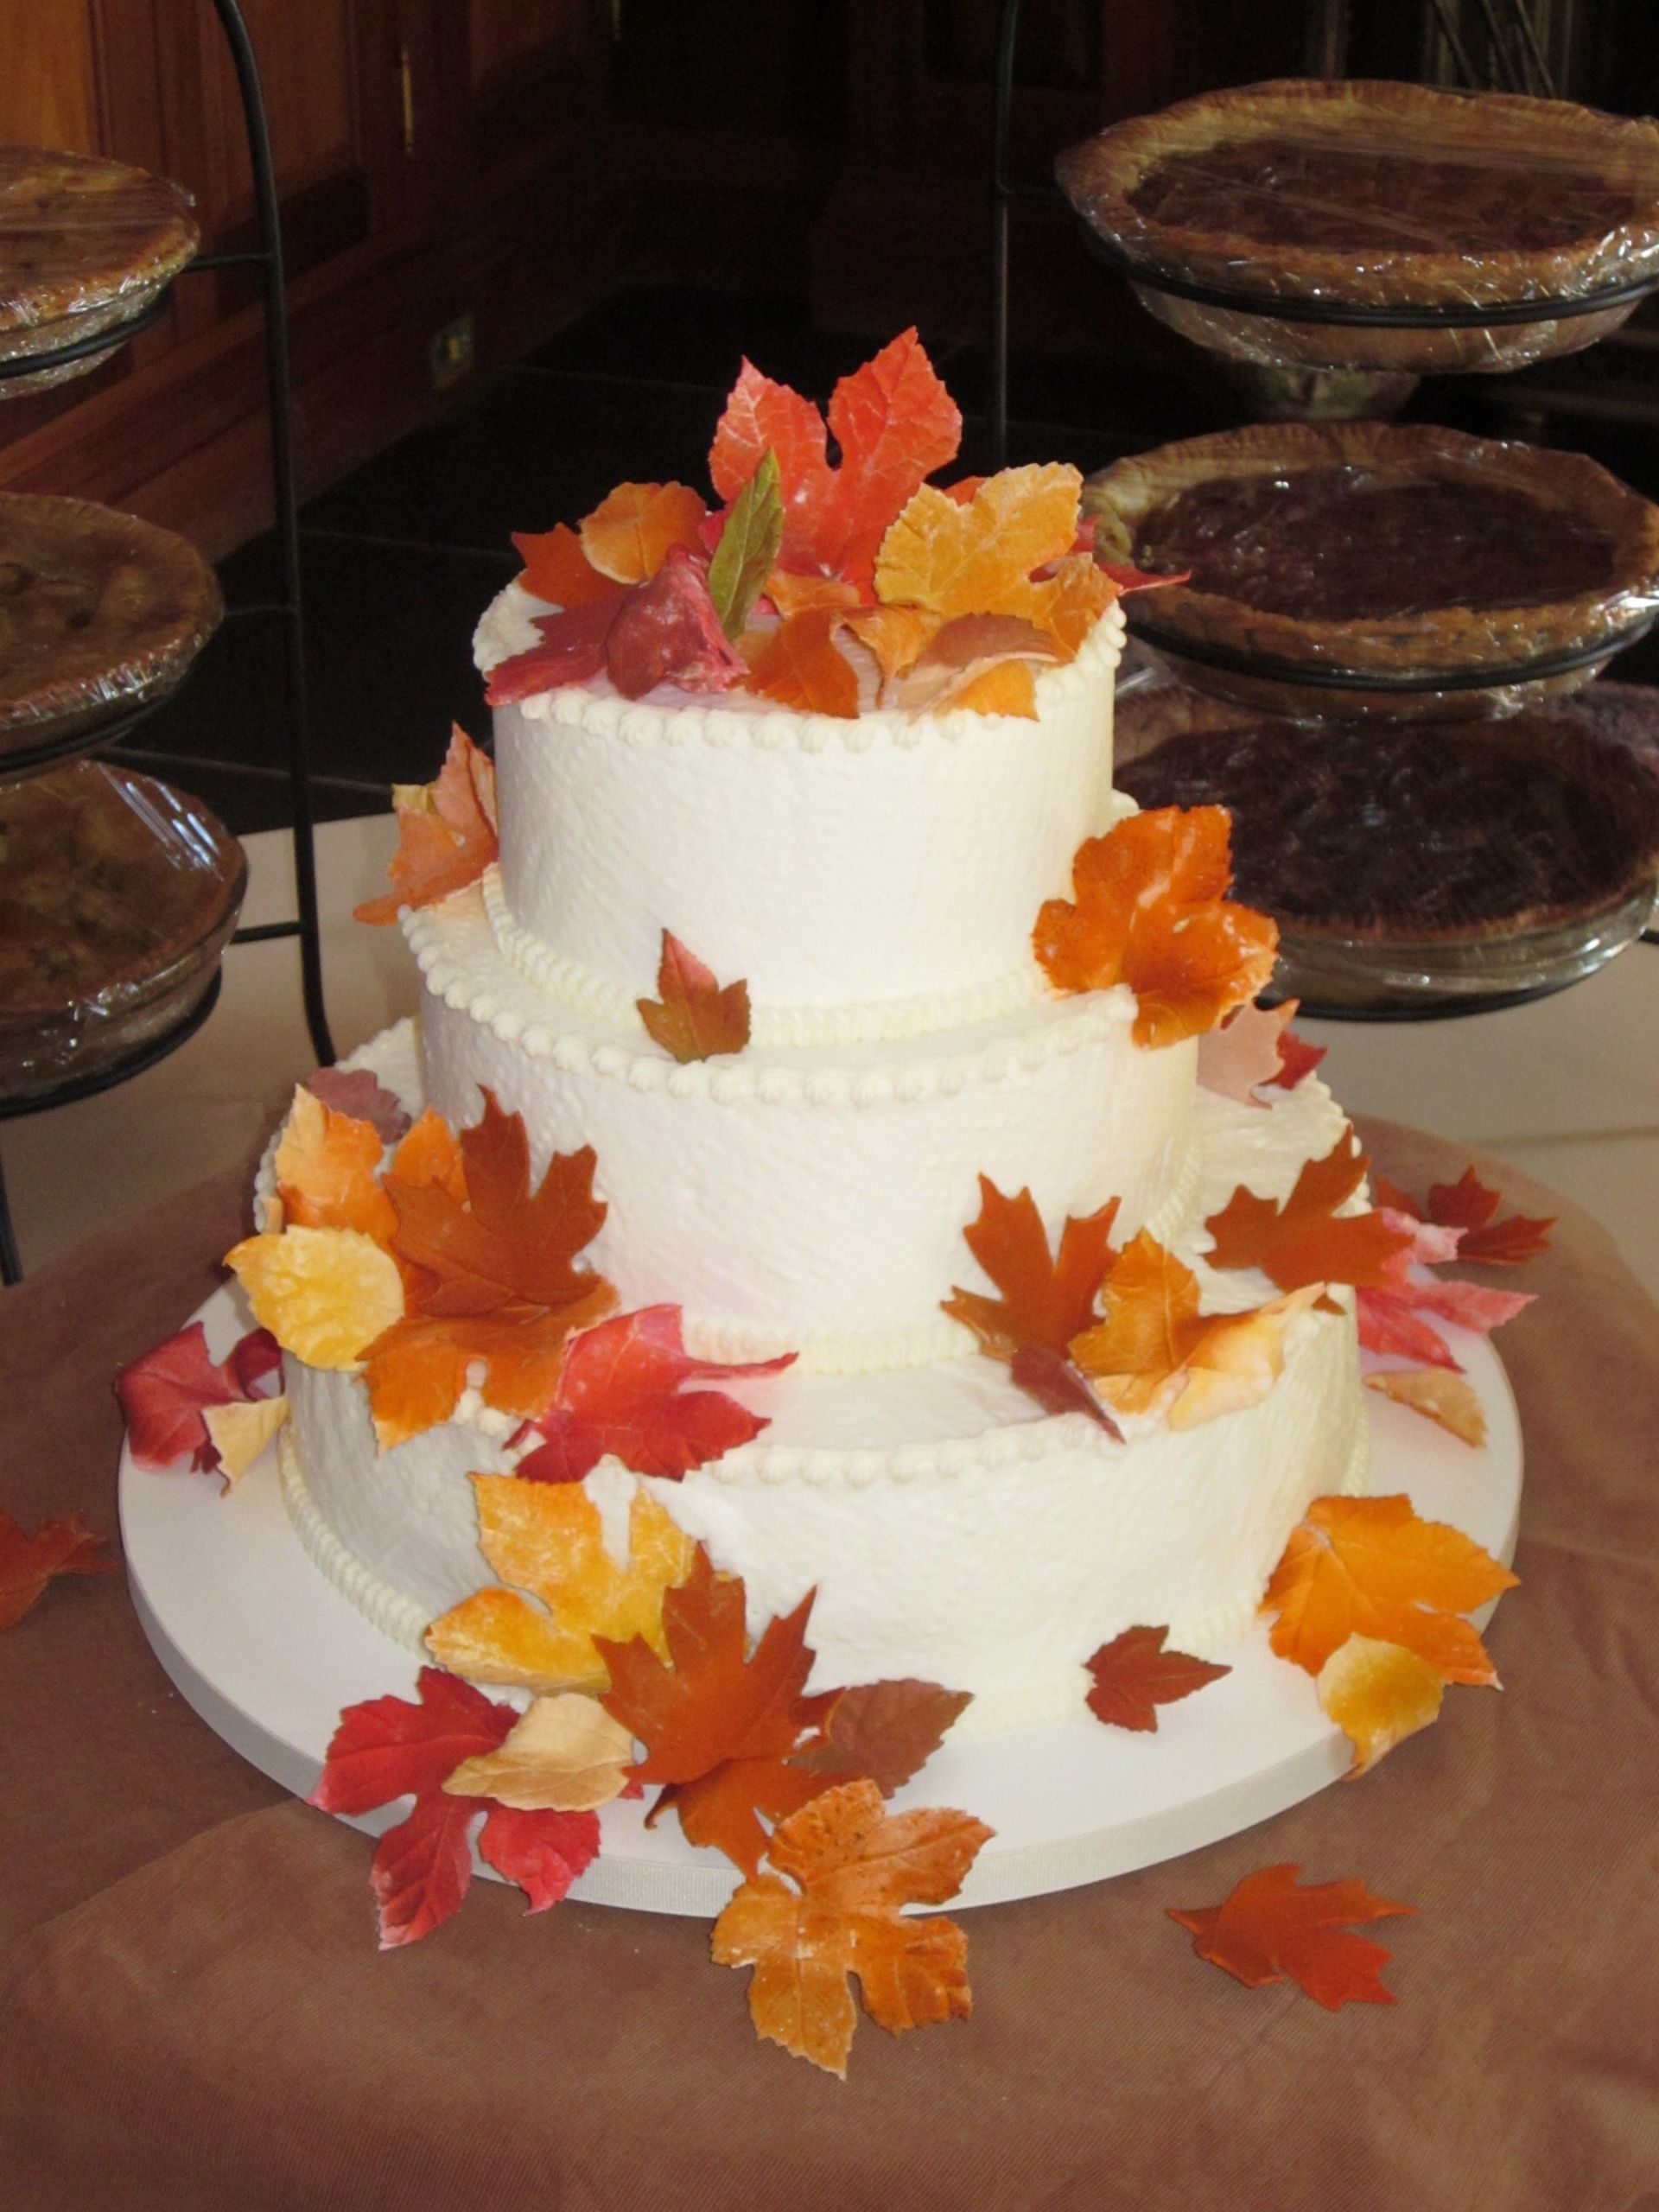 Simple Fall Wedding Cakes
 Pin by Cakes by Graham on Wedding Cakes Autumn